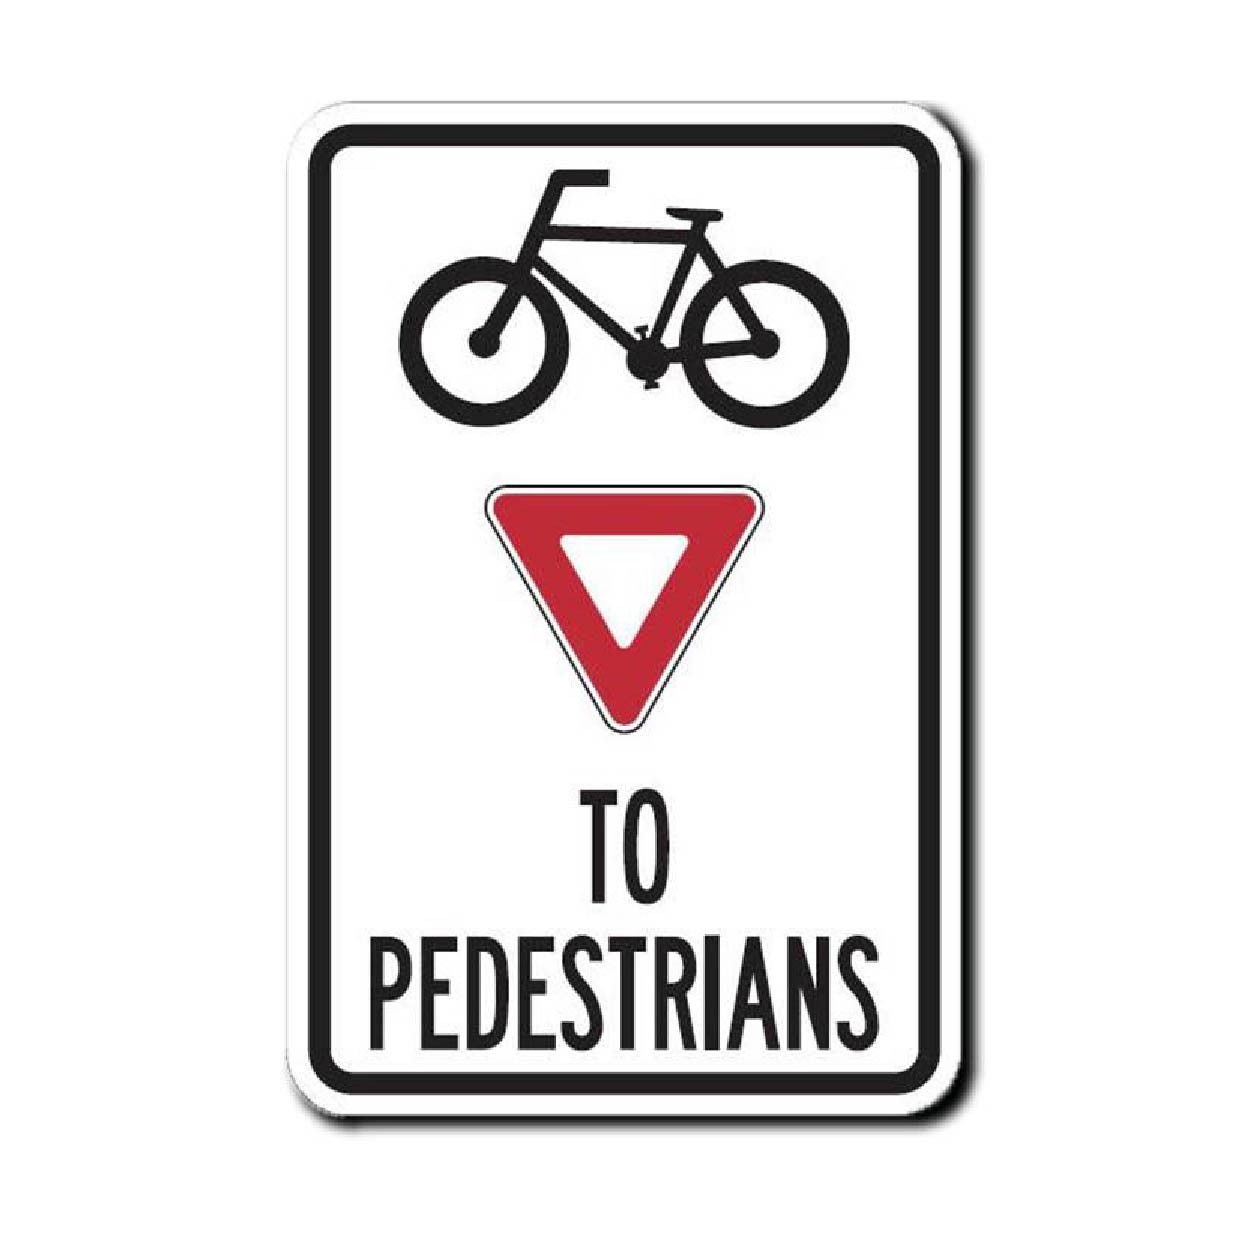 Bicycles Yield to Pedestrians